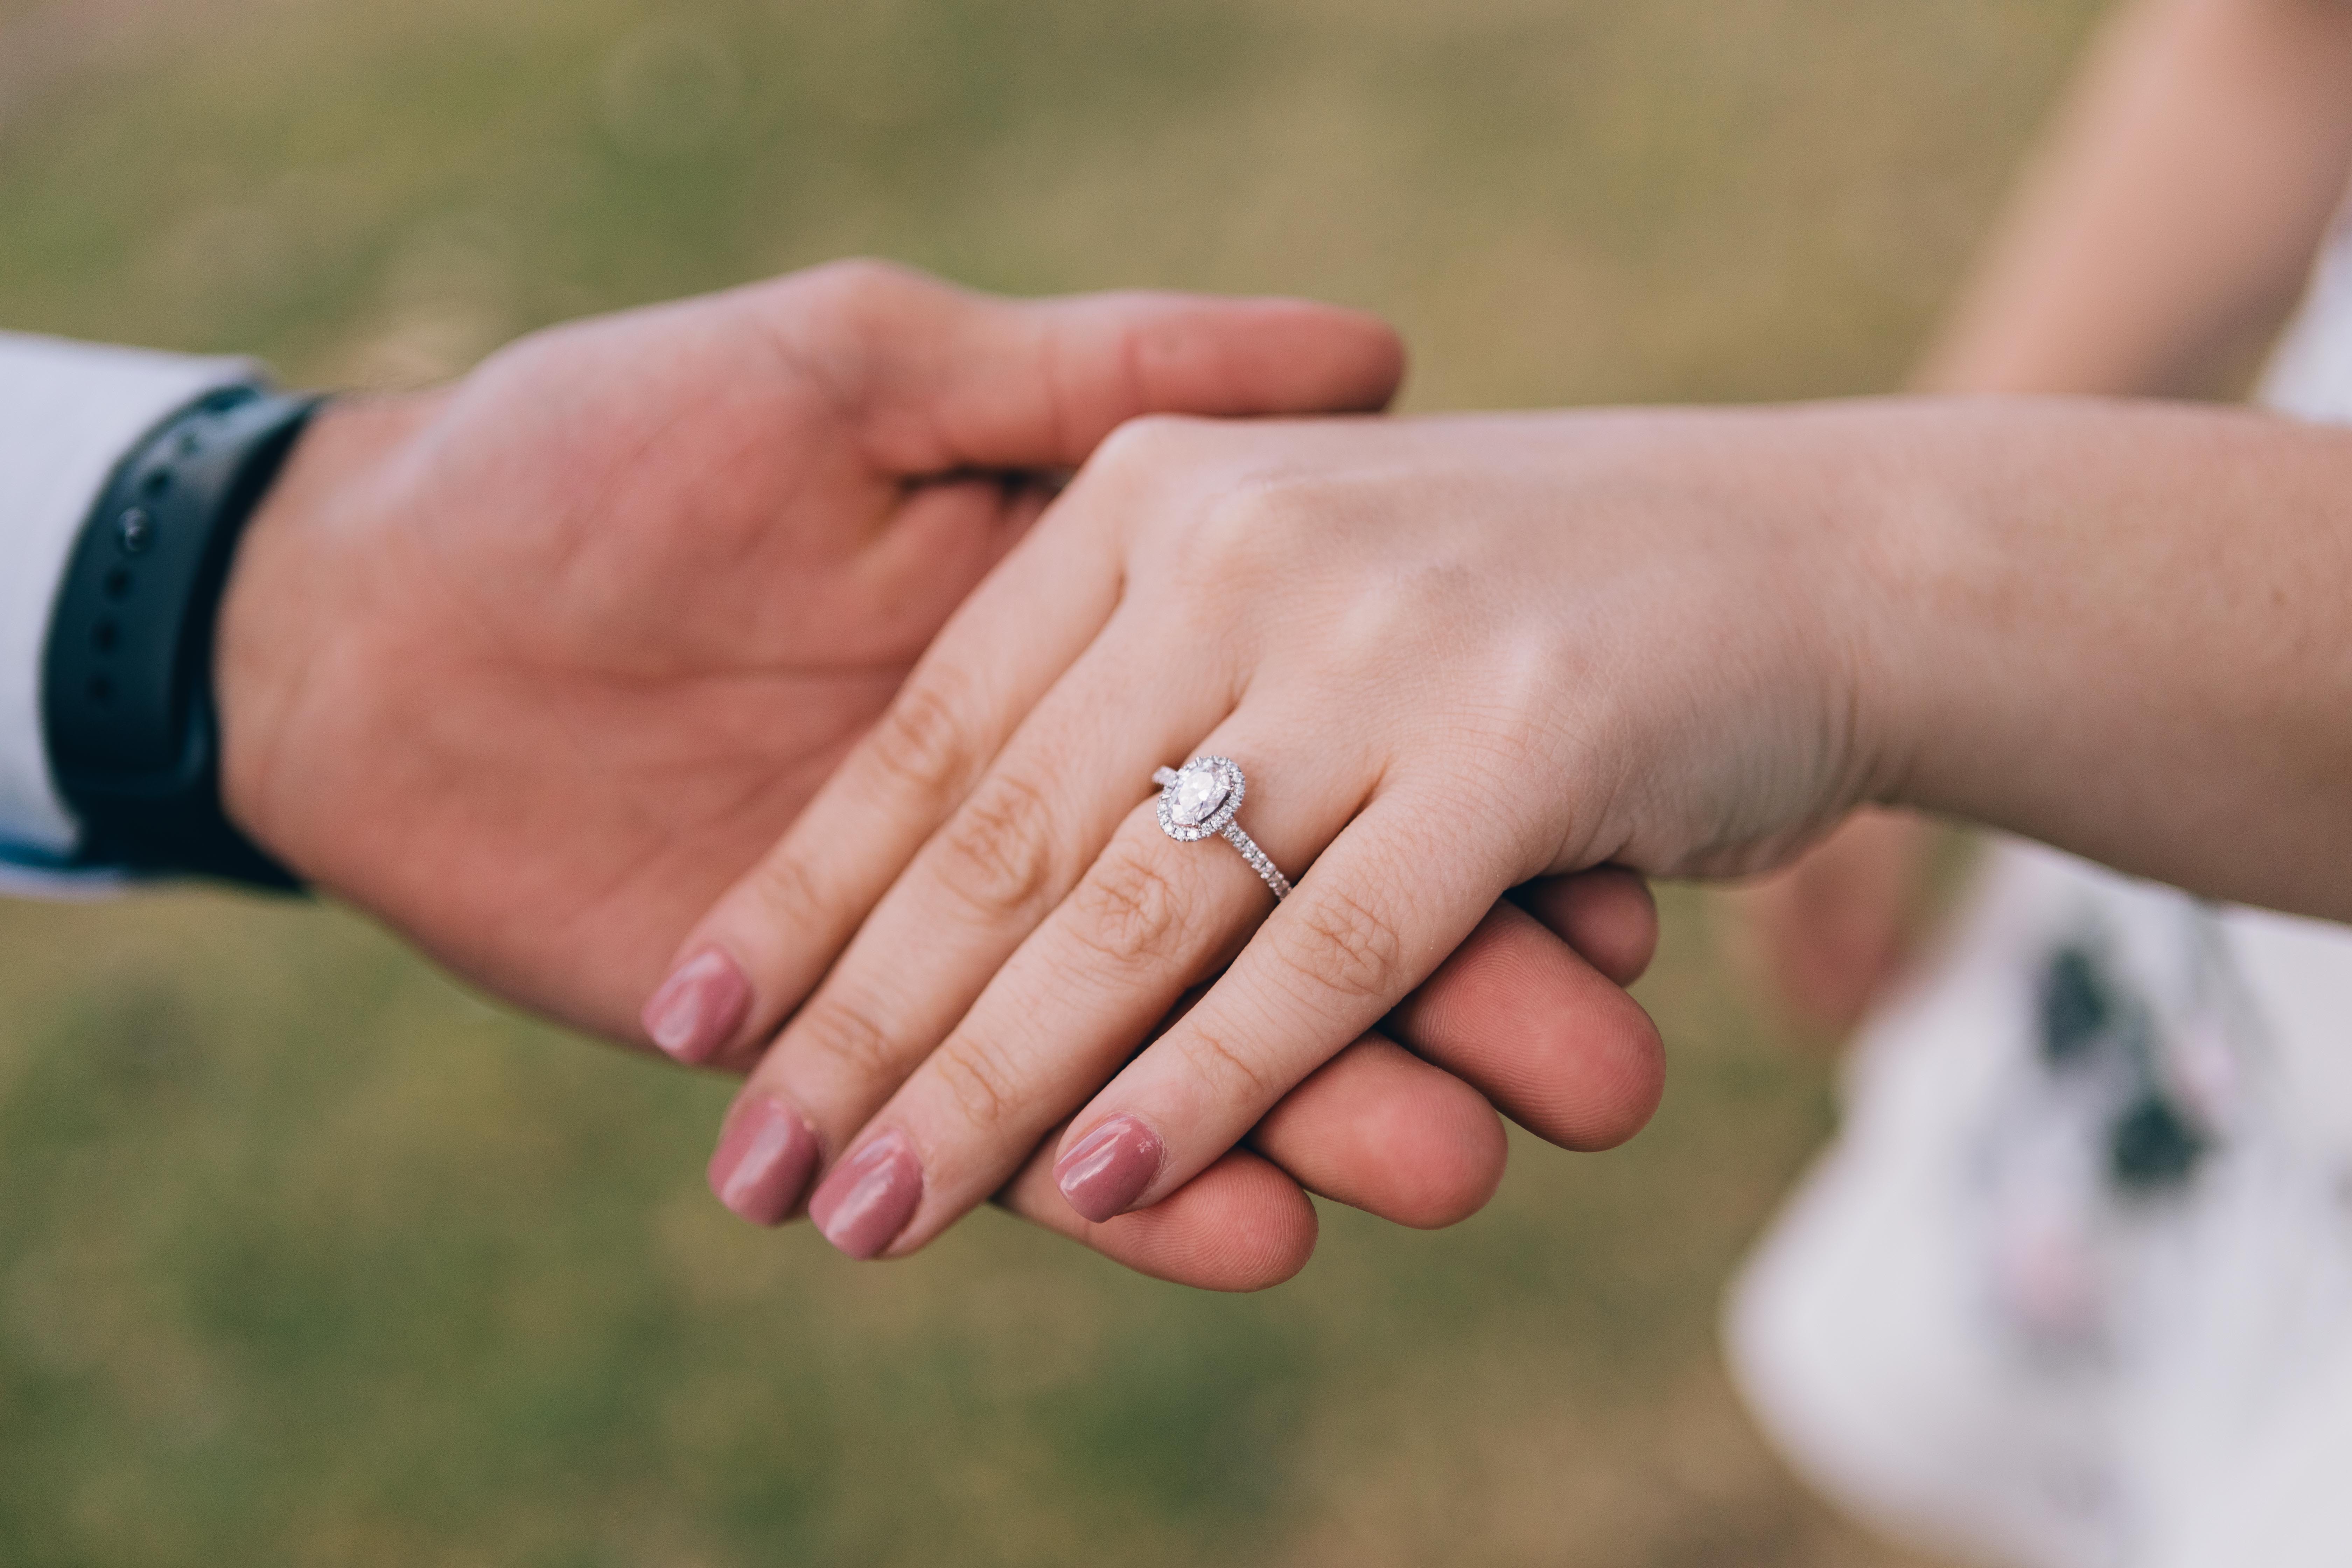 Jessica got engaged to the man of her dreams, and they immediately started planning their fairytale wedding. | Source: Pexels